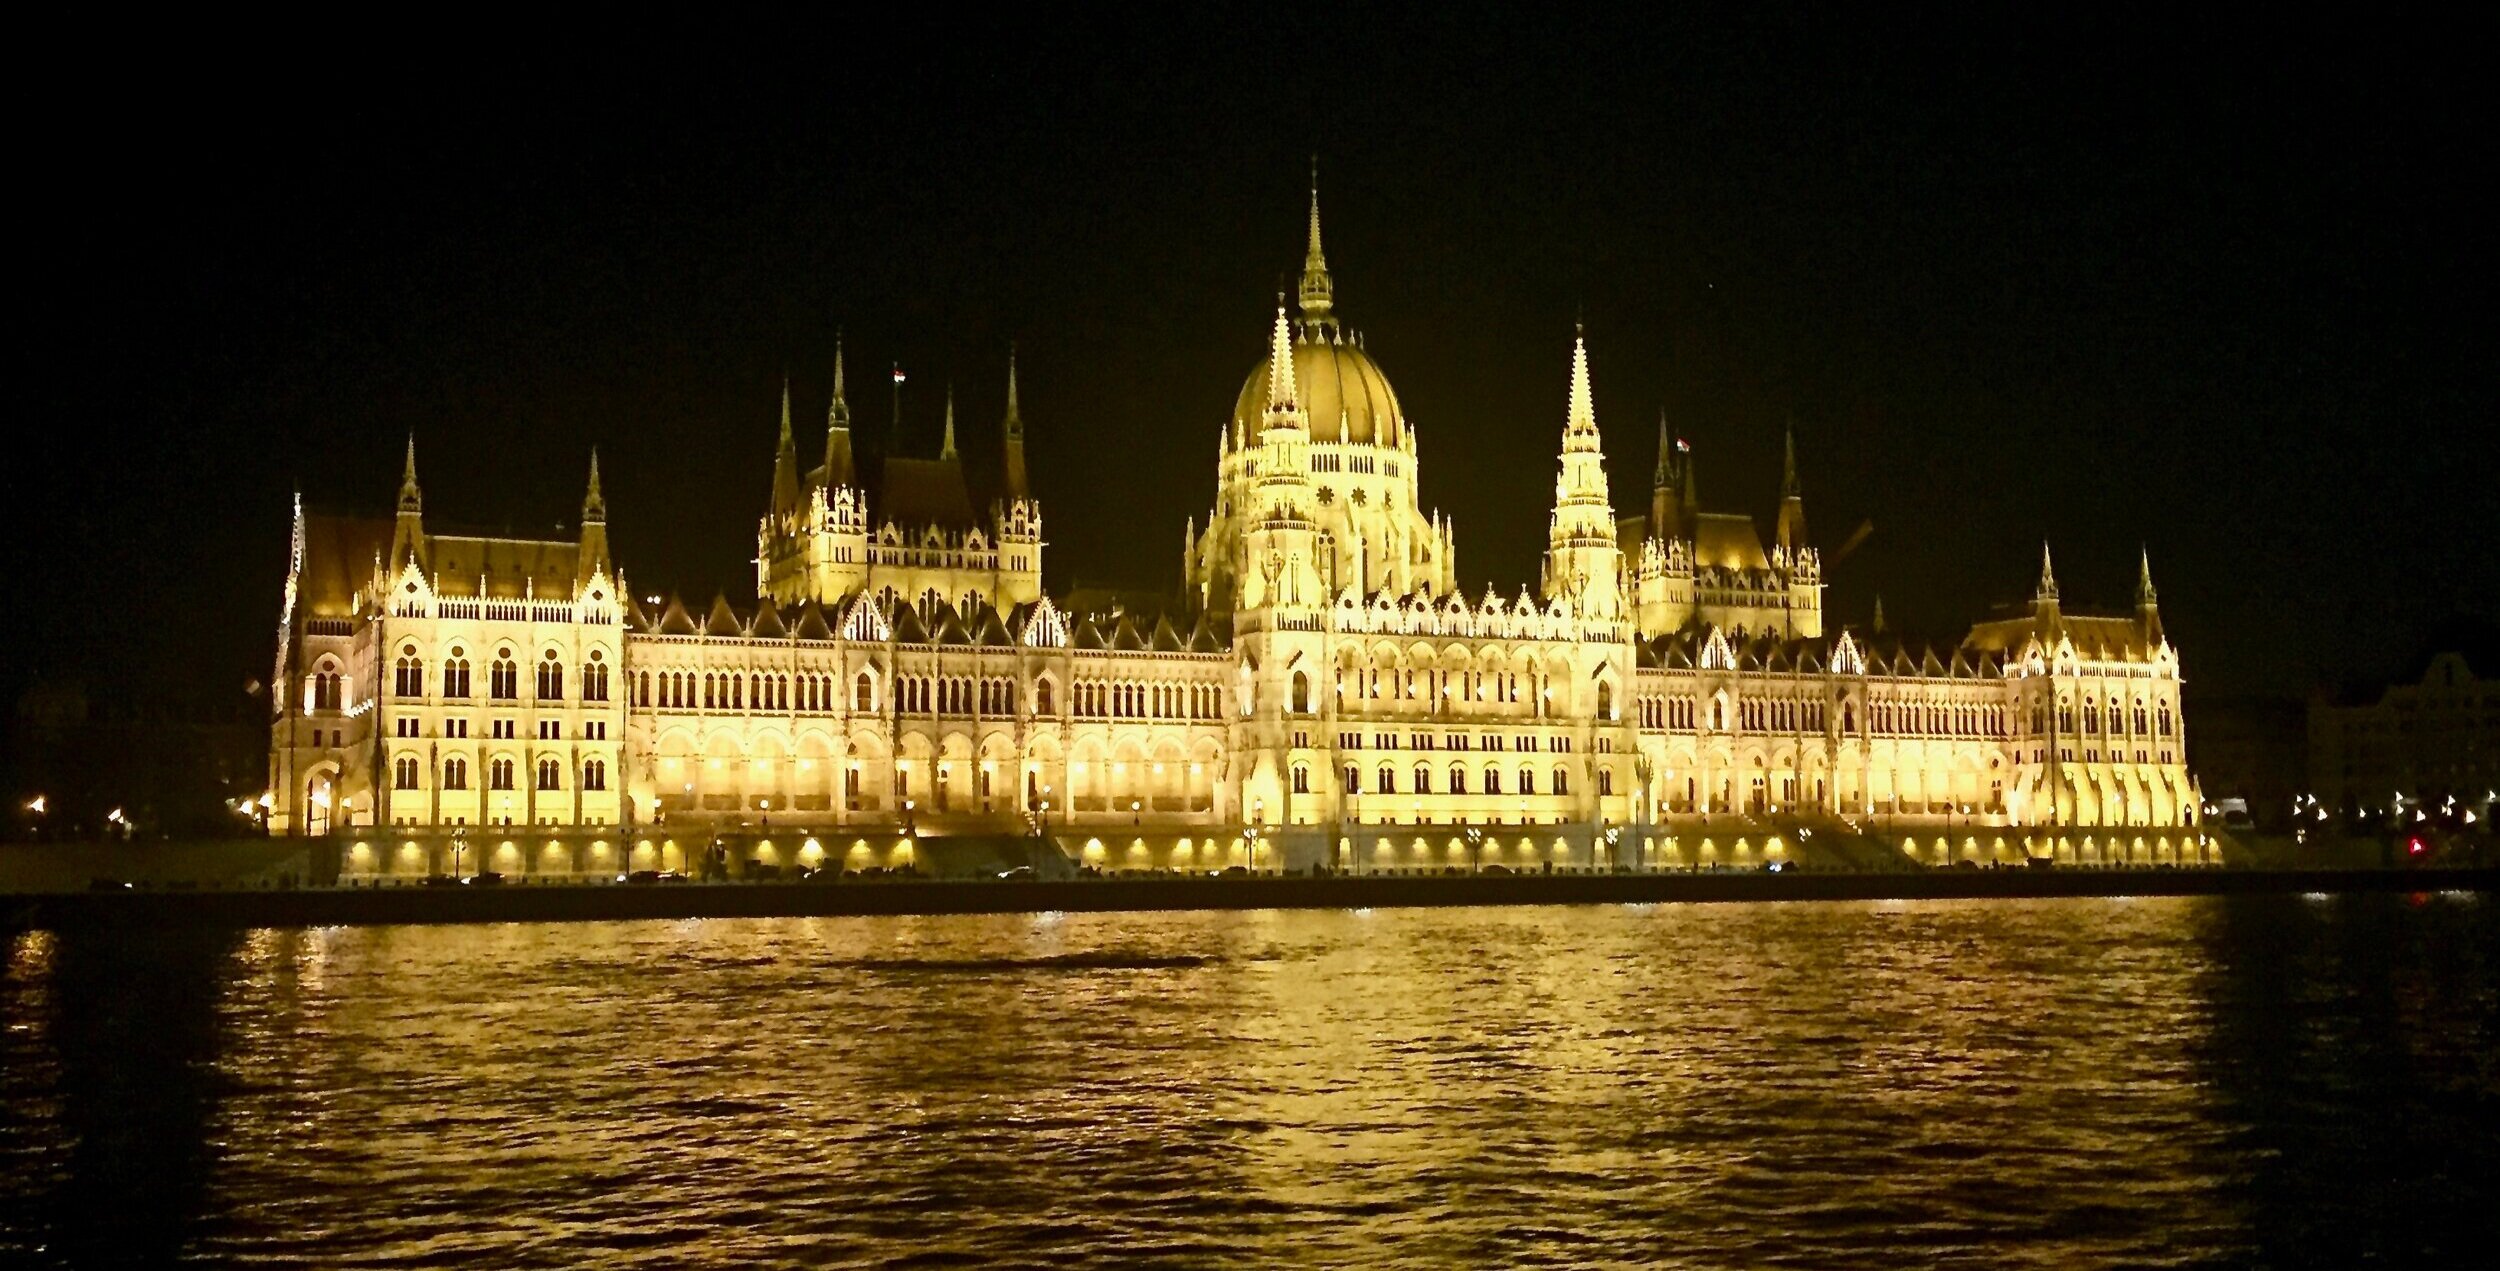 The Hungarian Parliament during a night cruise on the Danube in Budapest